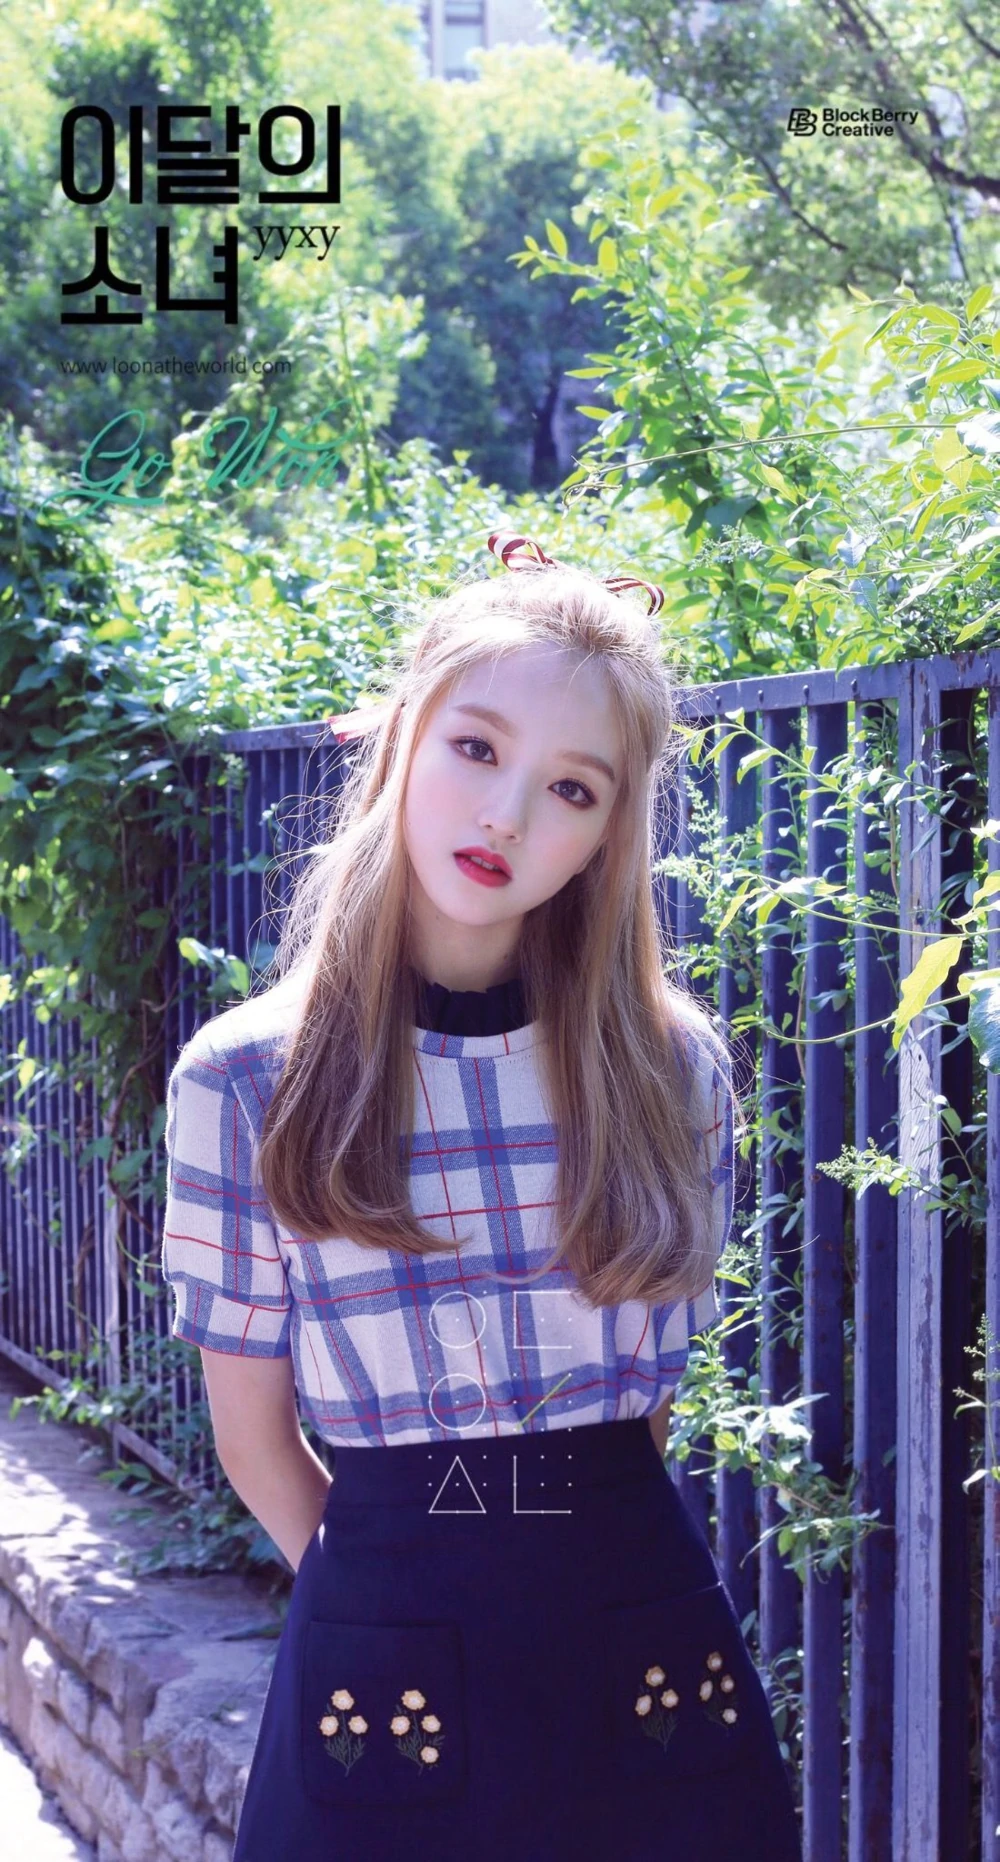 Loona yyxy Beauty & the Beat Gowon Concept Teaser Picture Image Photo Kpop K-Concept 1